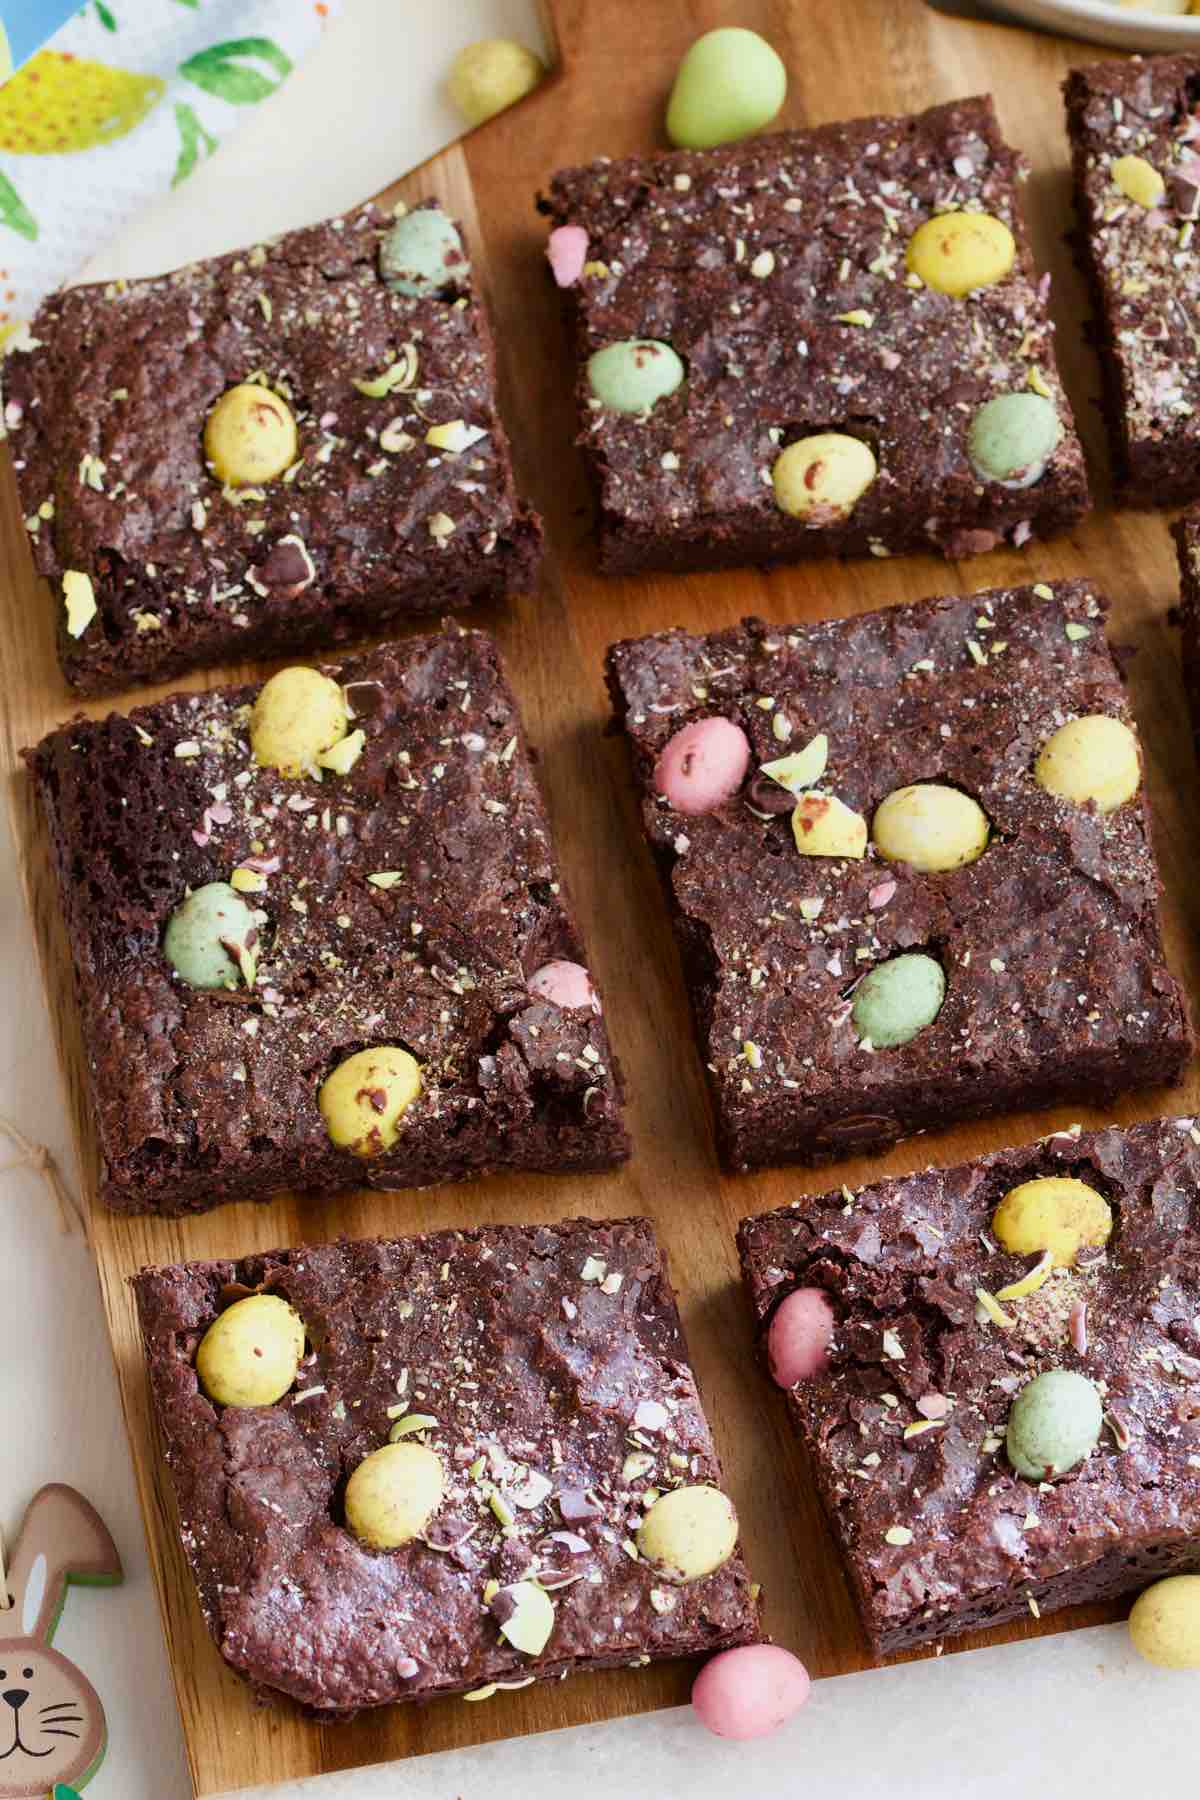 Mini egg brownie squares on a board.